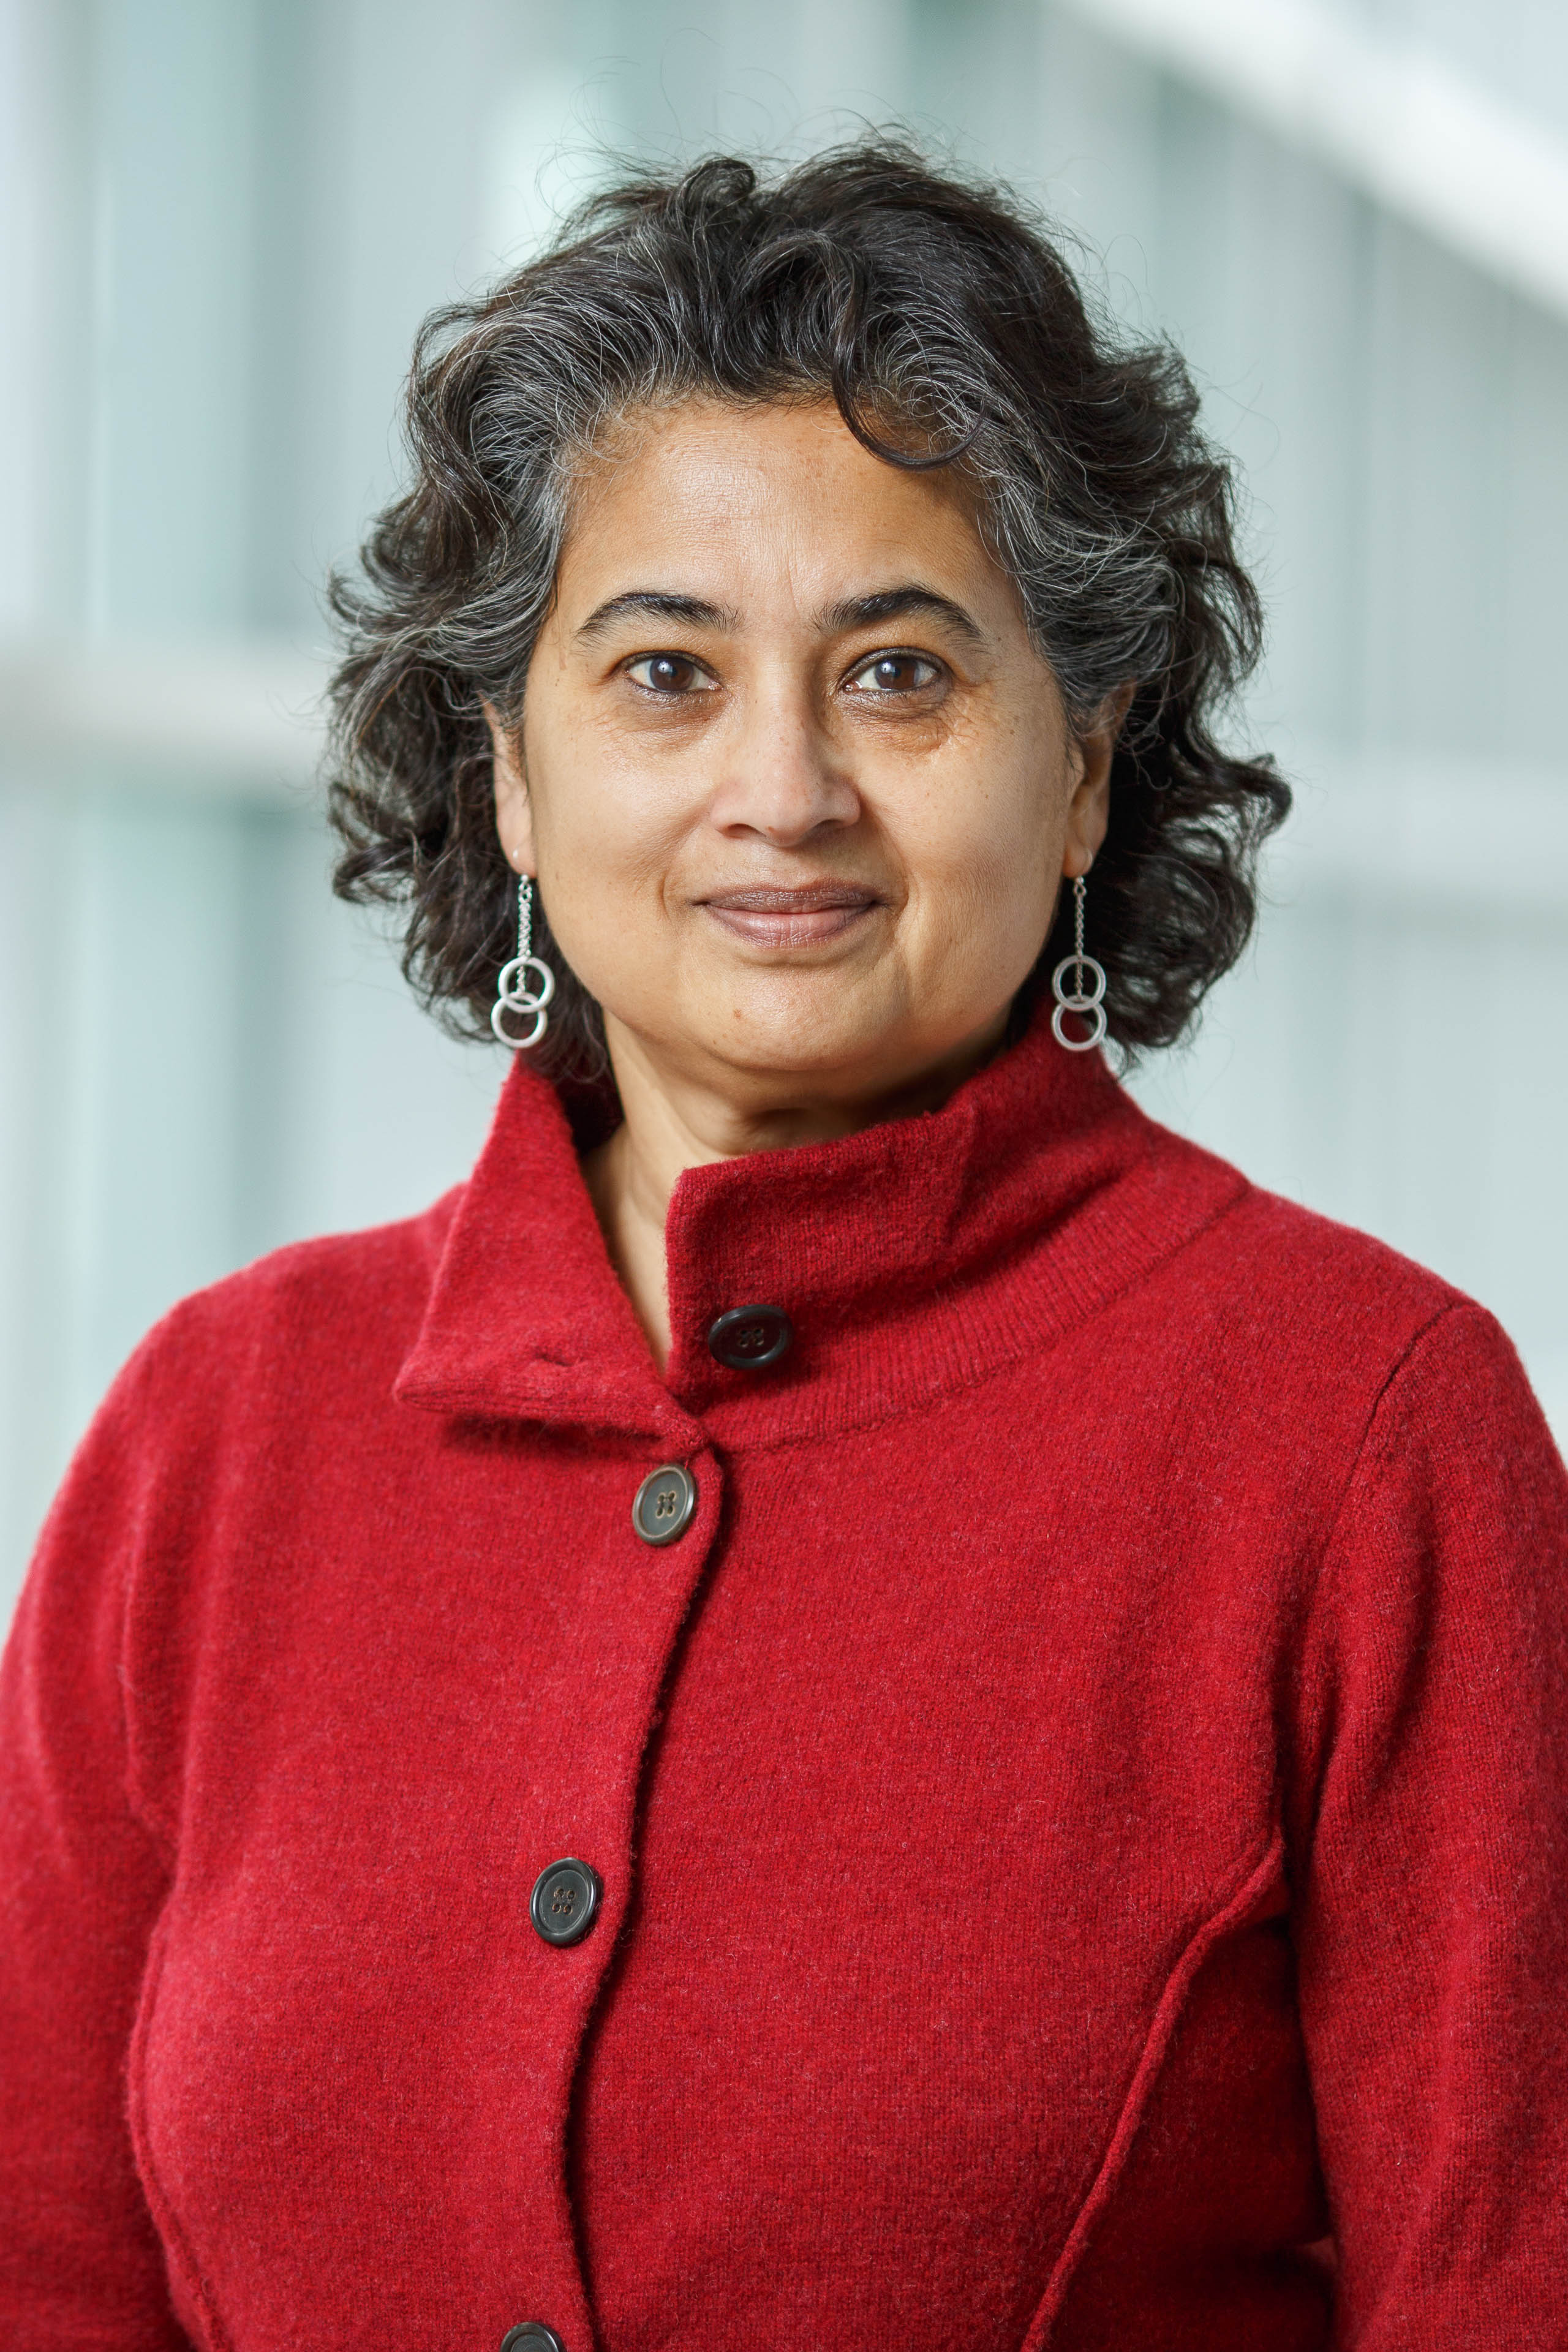 A head shot of Piali Sengupta facing directly into the camera. She has salt and pepper hair that reaches her shoulders, dangling silver earrings, and a bright red sweater with a high collar.